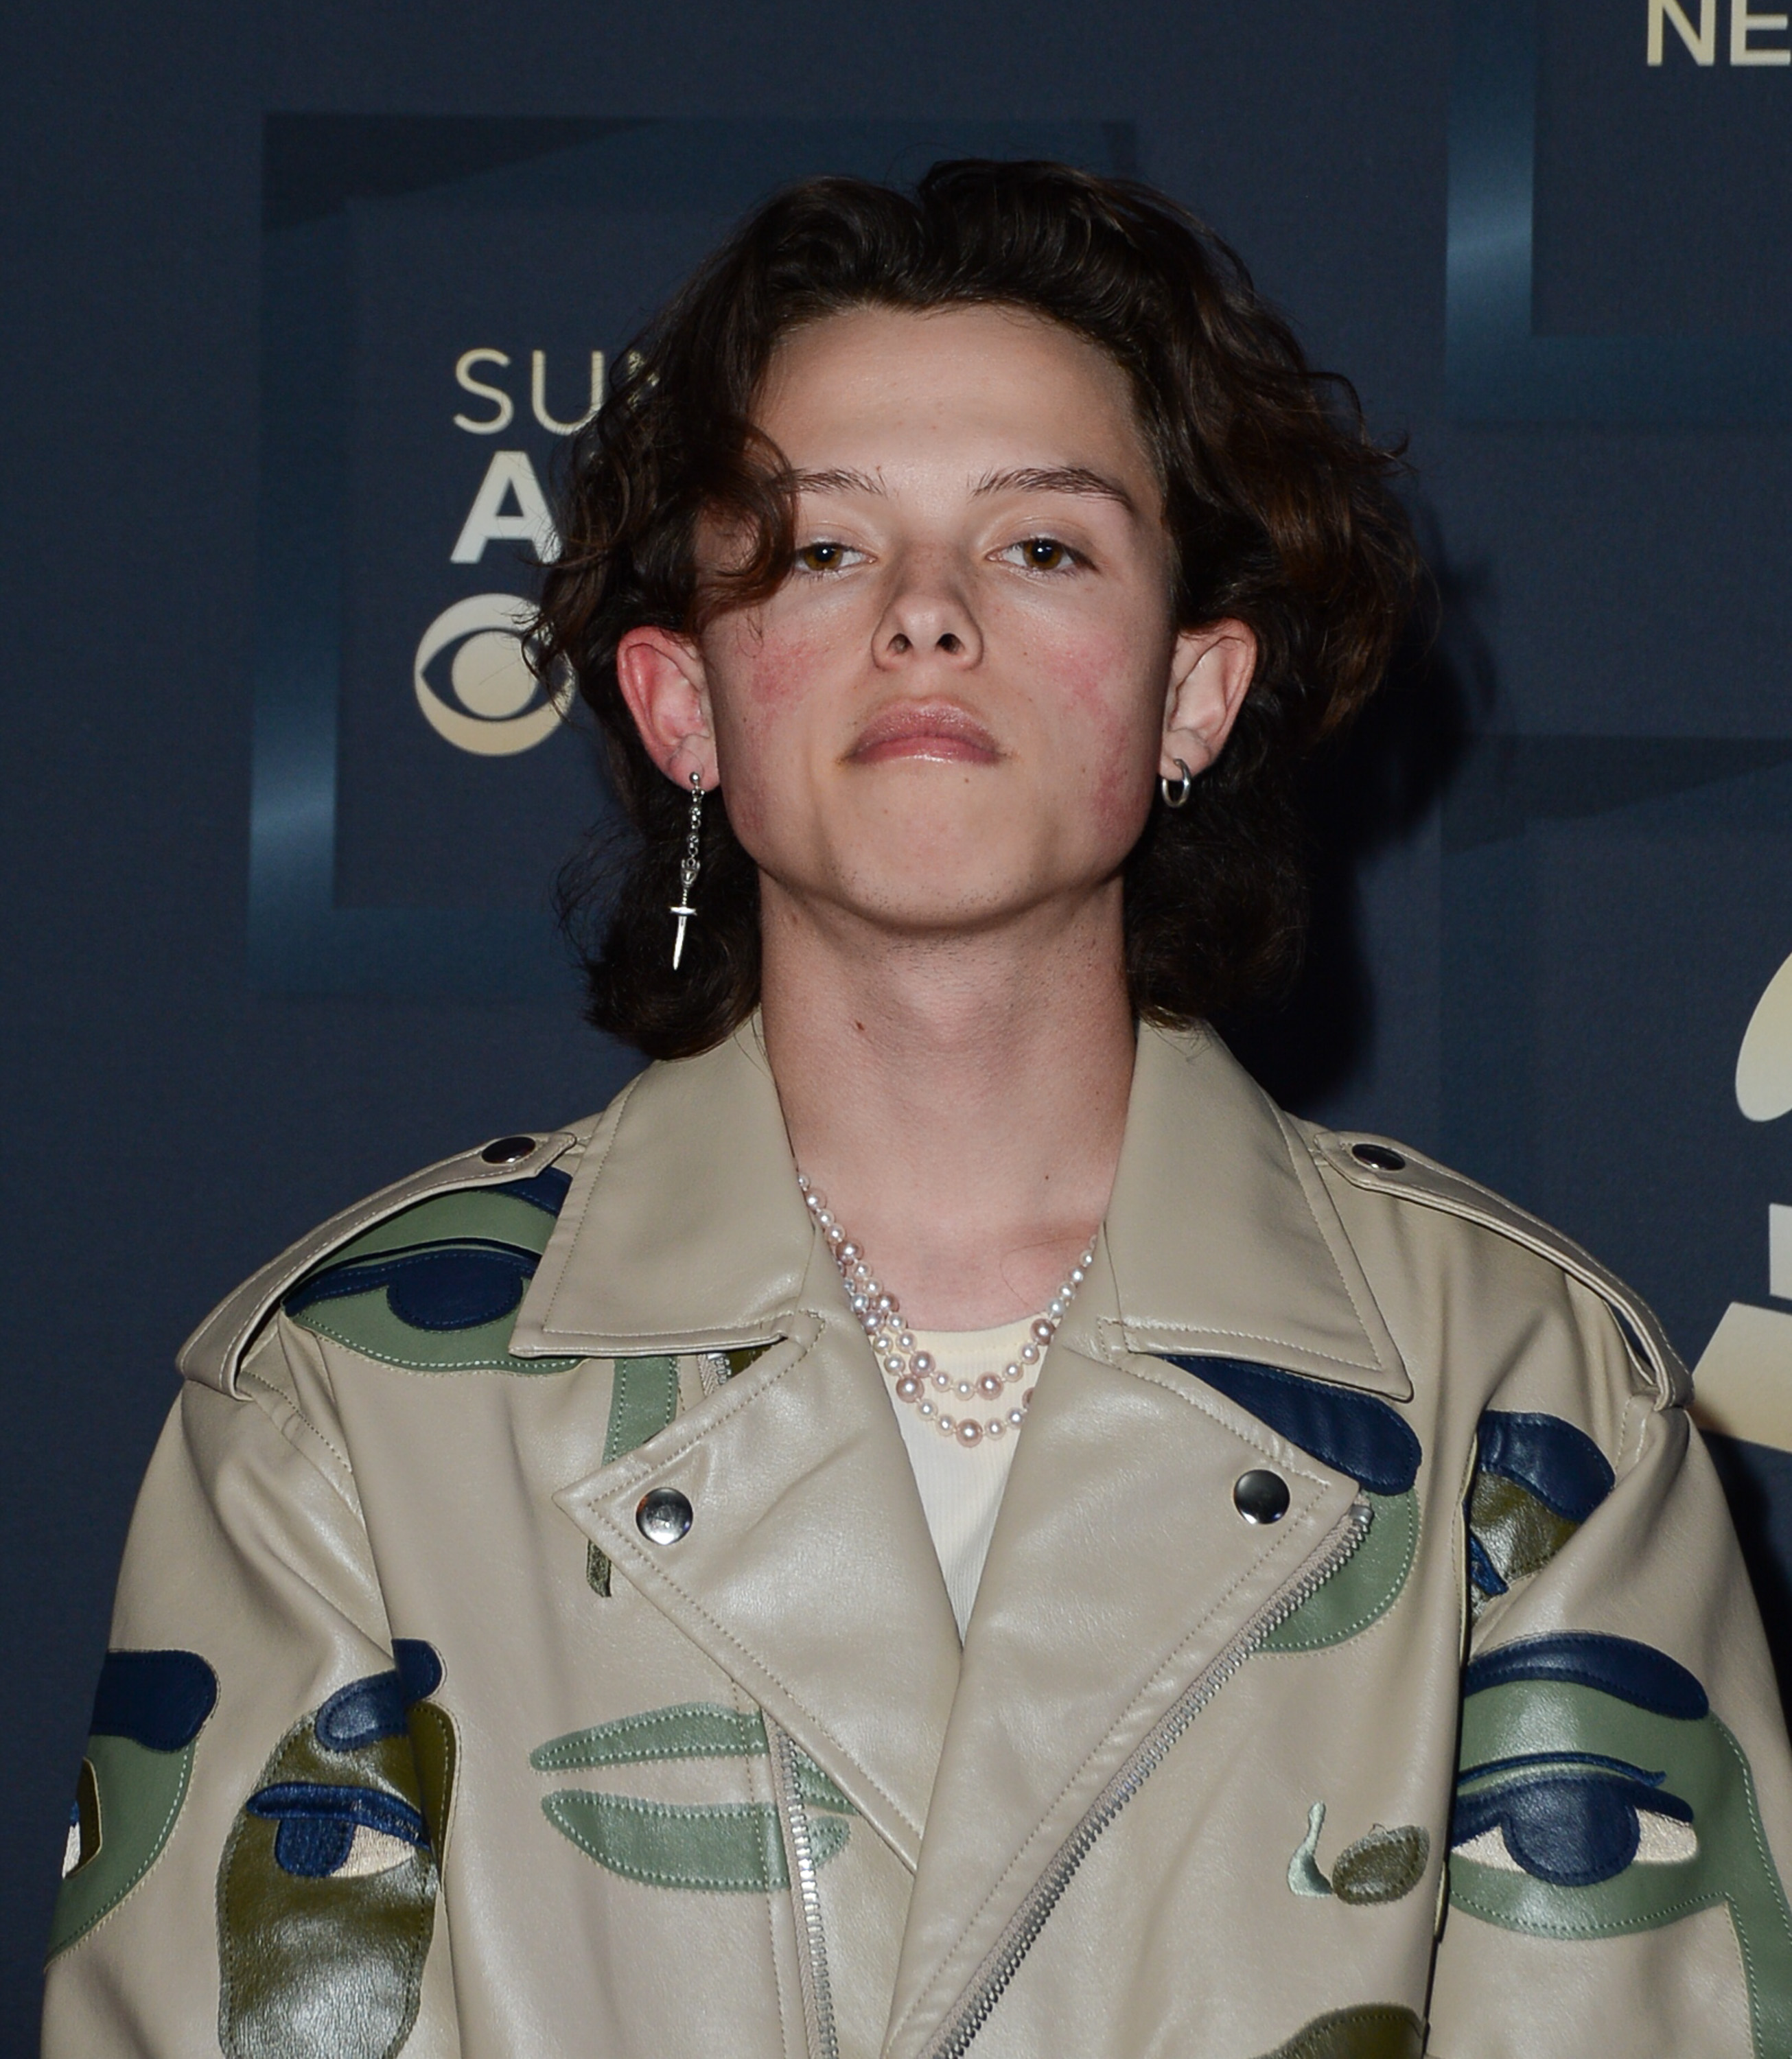 Jacob Sartorius at Park MGM on April 02, 2022, in Las Vegas, Nevada. | Source: Getty Images